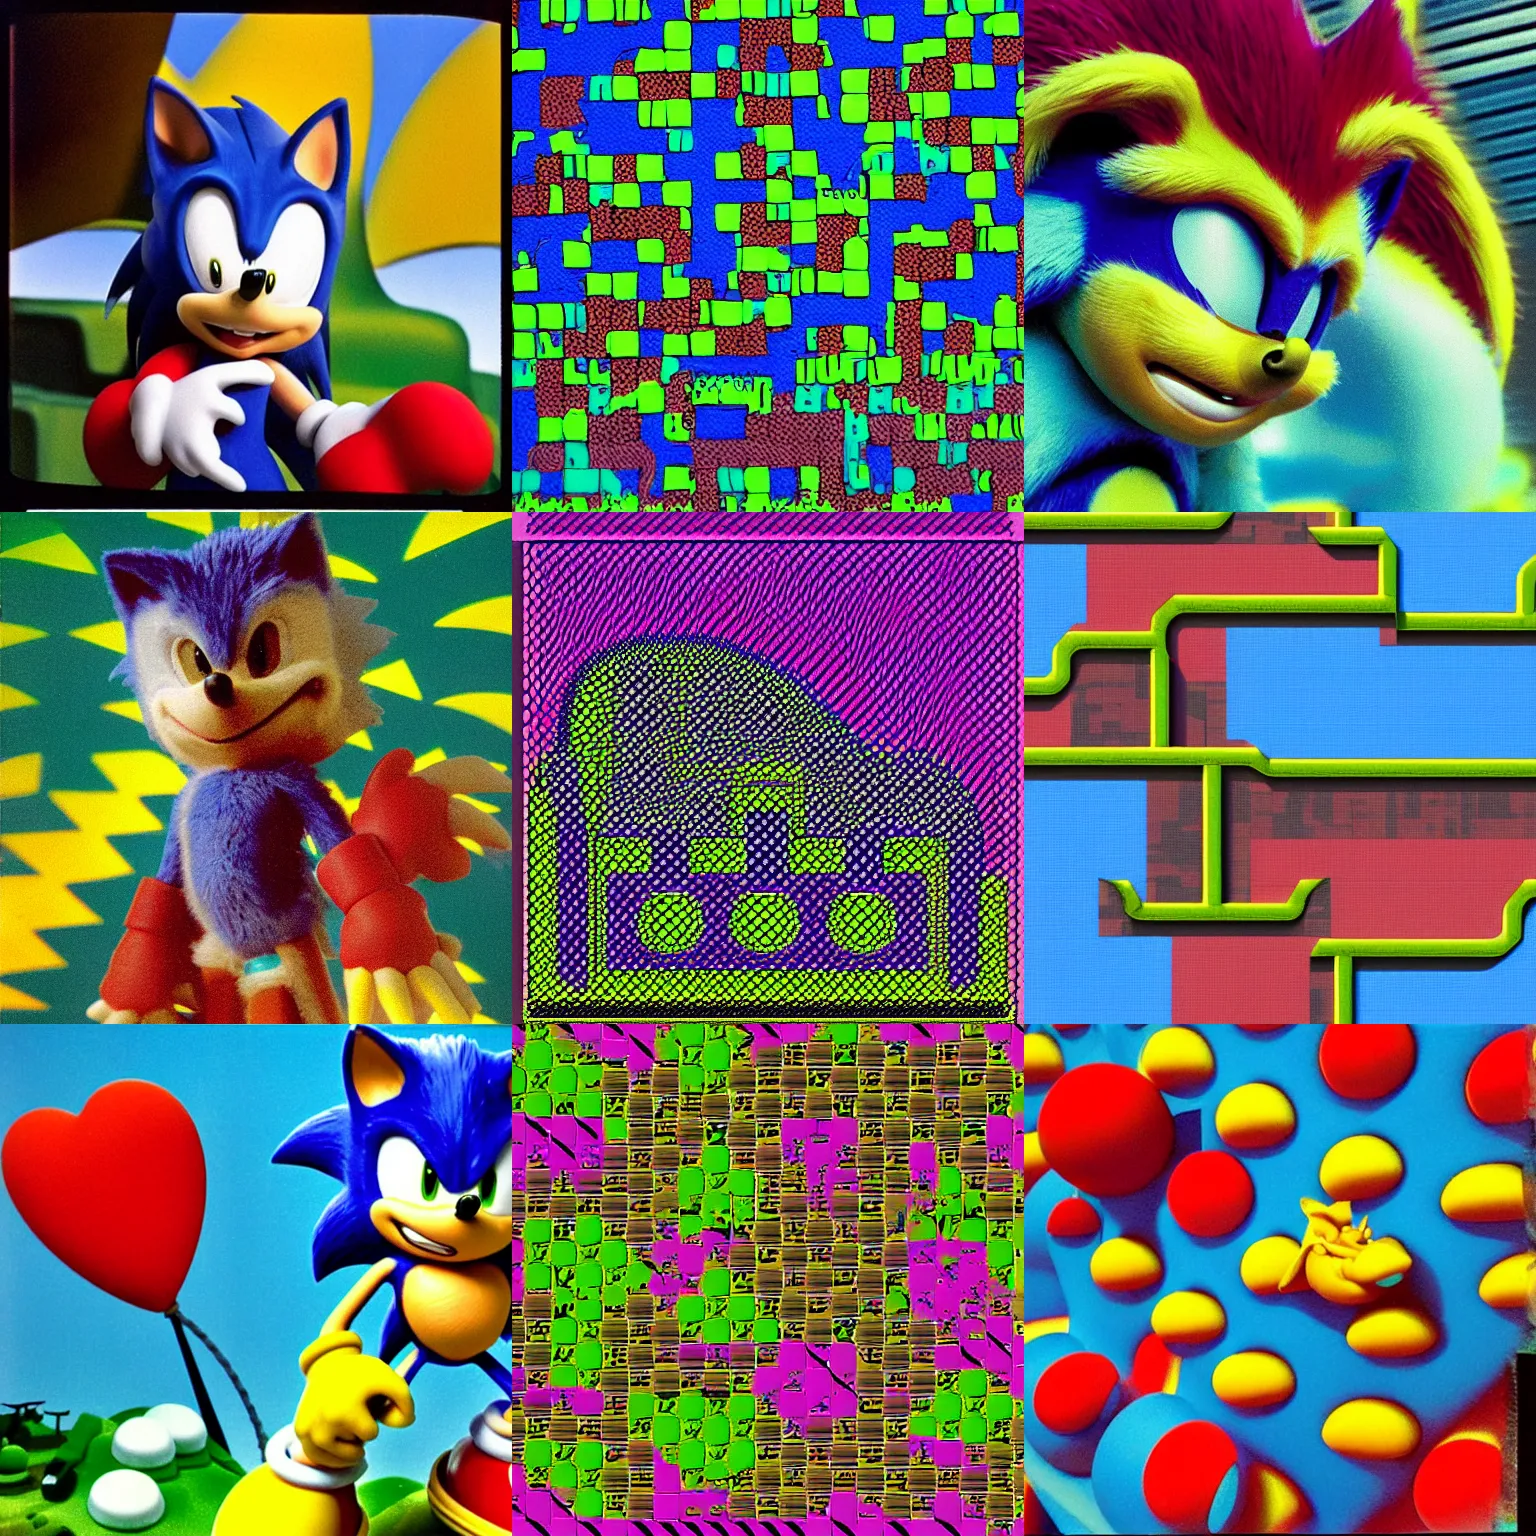 Prompt: velvia closeup sonic the hedgehog dreaming of puffy portrait colossal claymation scifi checkerboard matte painting landscape of a surreal acid, sonic the hedgehog retro moulded domineering craven chubby soggy roomy noxious fluttering checkerboard background 1 9 8 0 s 1 9 8 2 sega genesis video game album cover